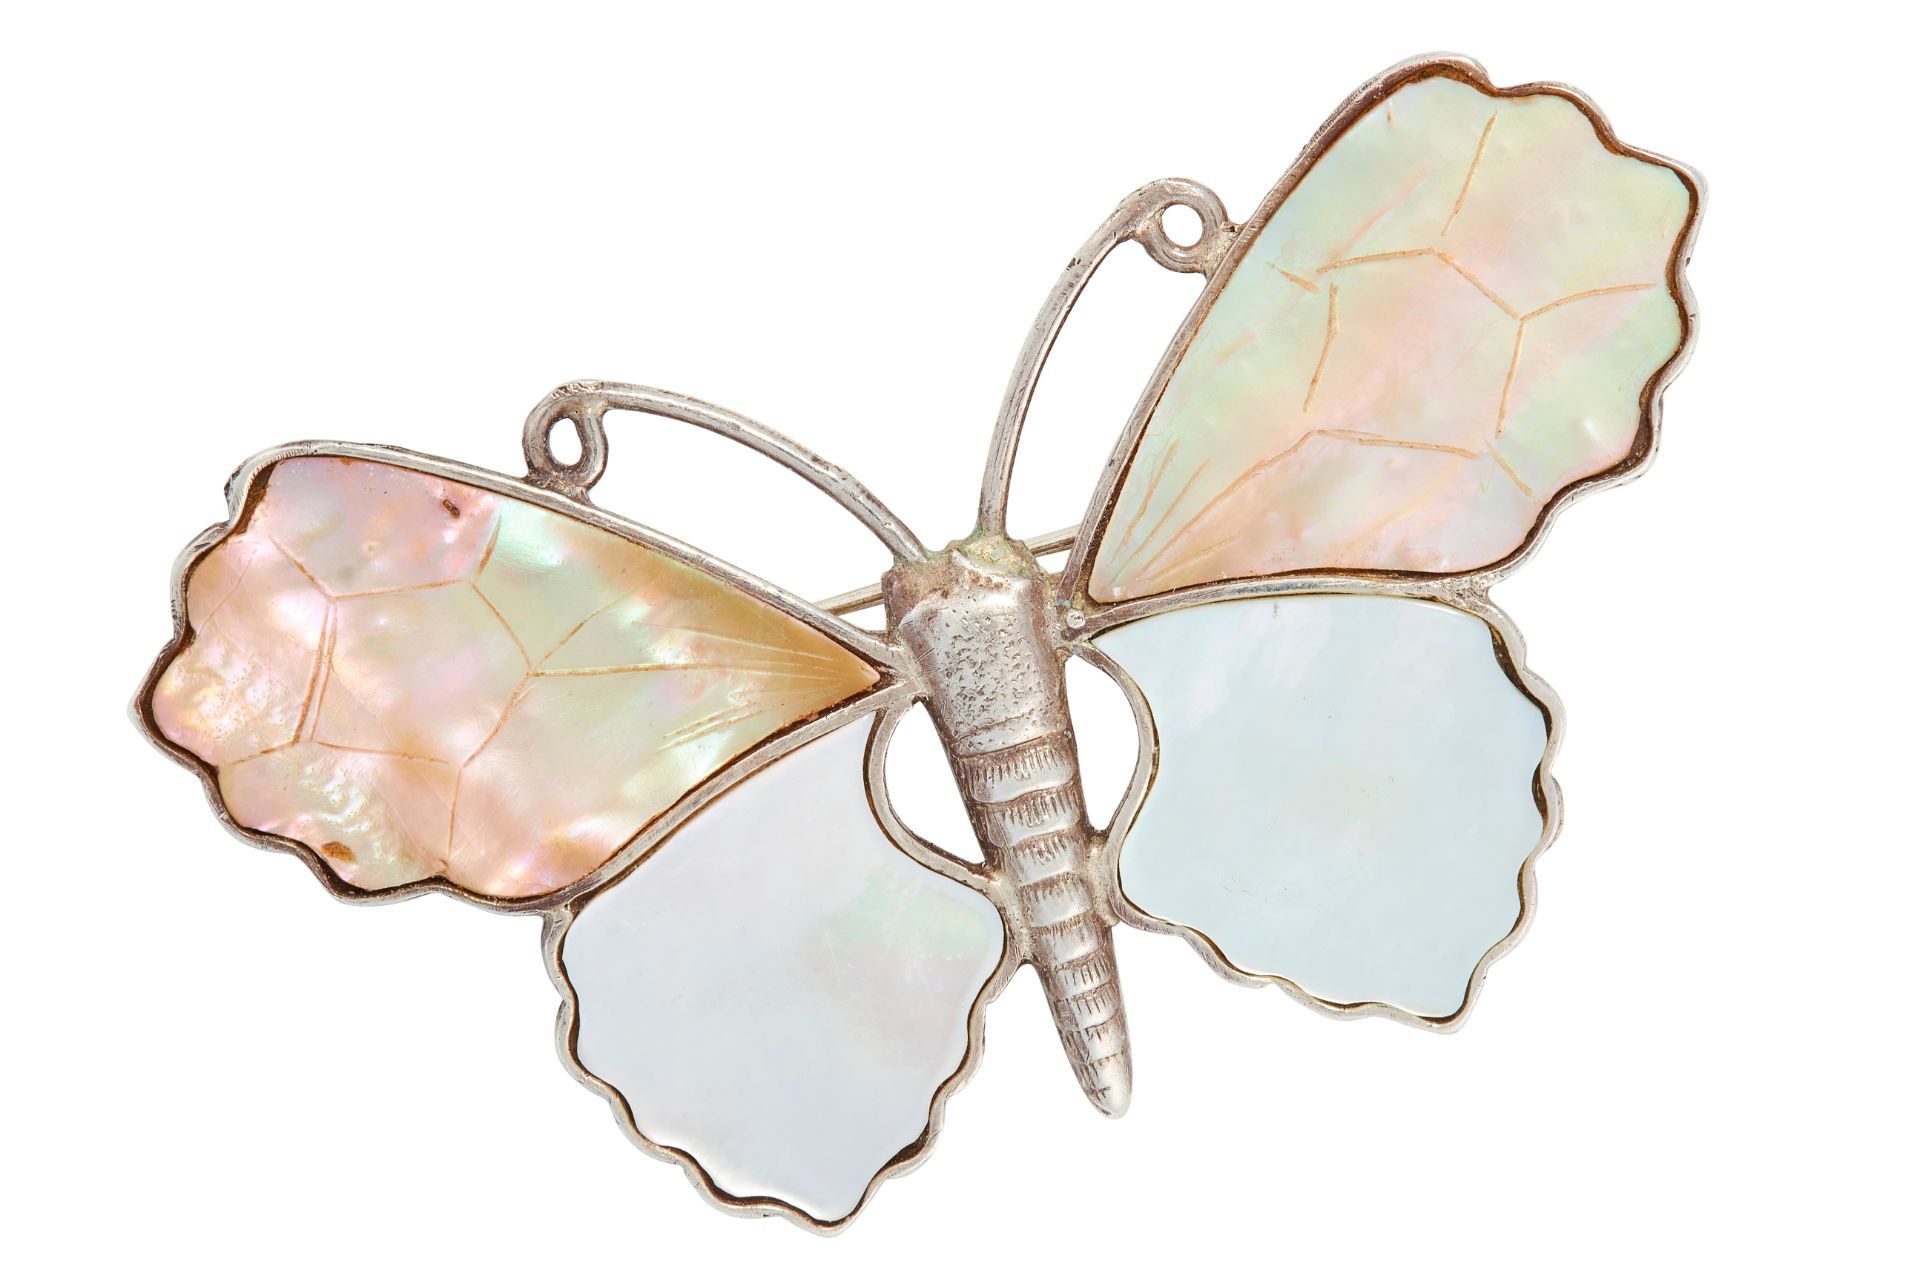 A MOTHER OF PEARL BUTTERFLY BROOCH in silver, designed as a butterfly, the wings set with polished